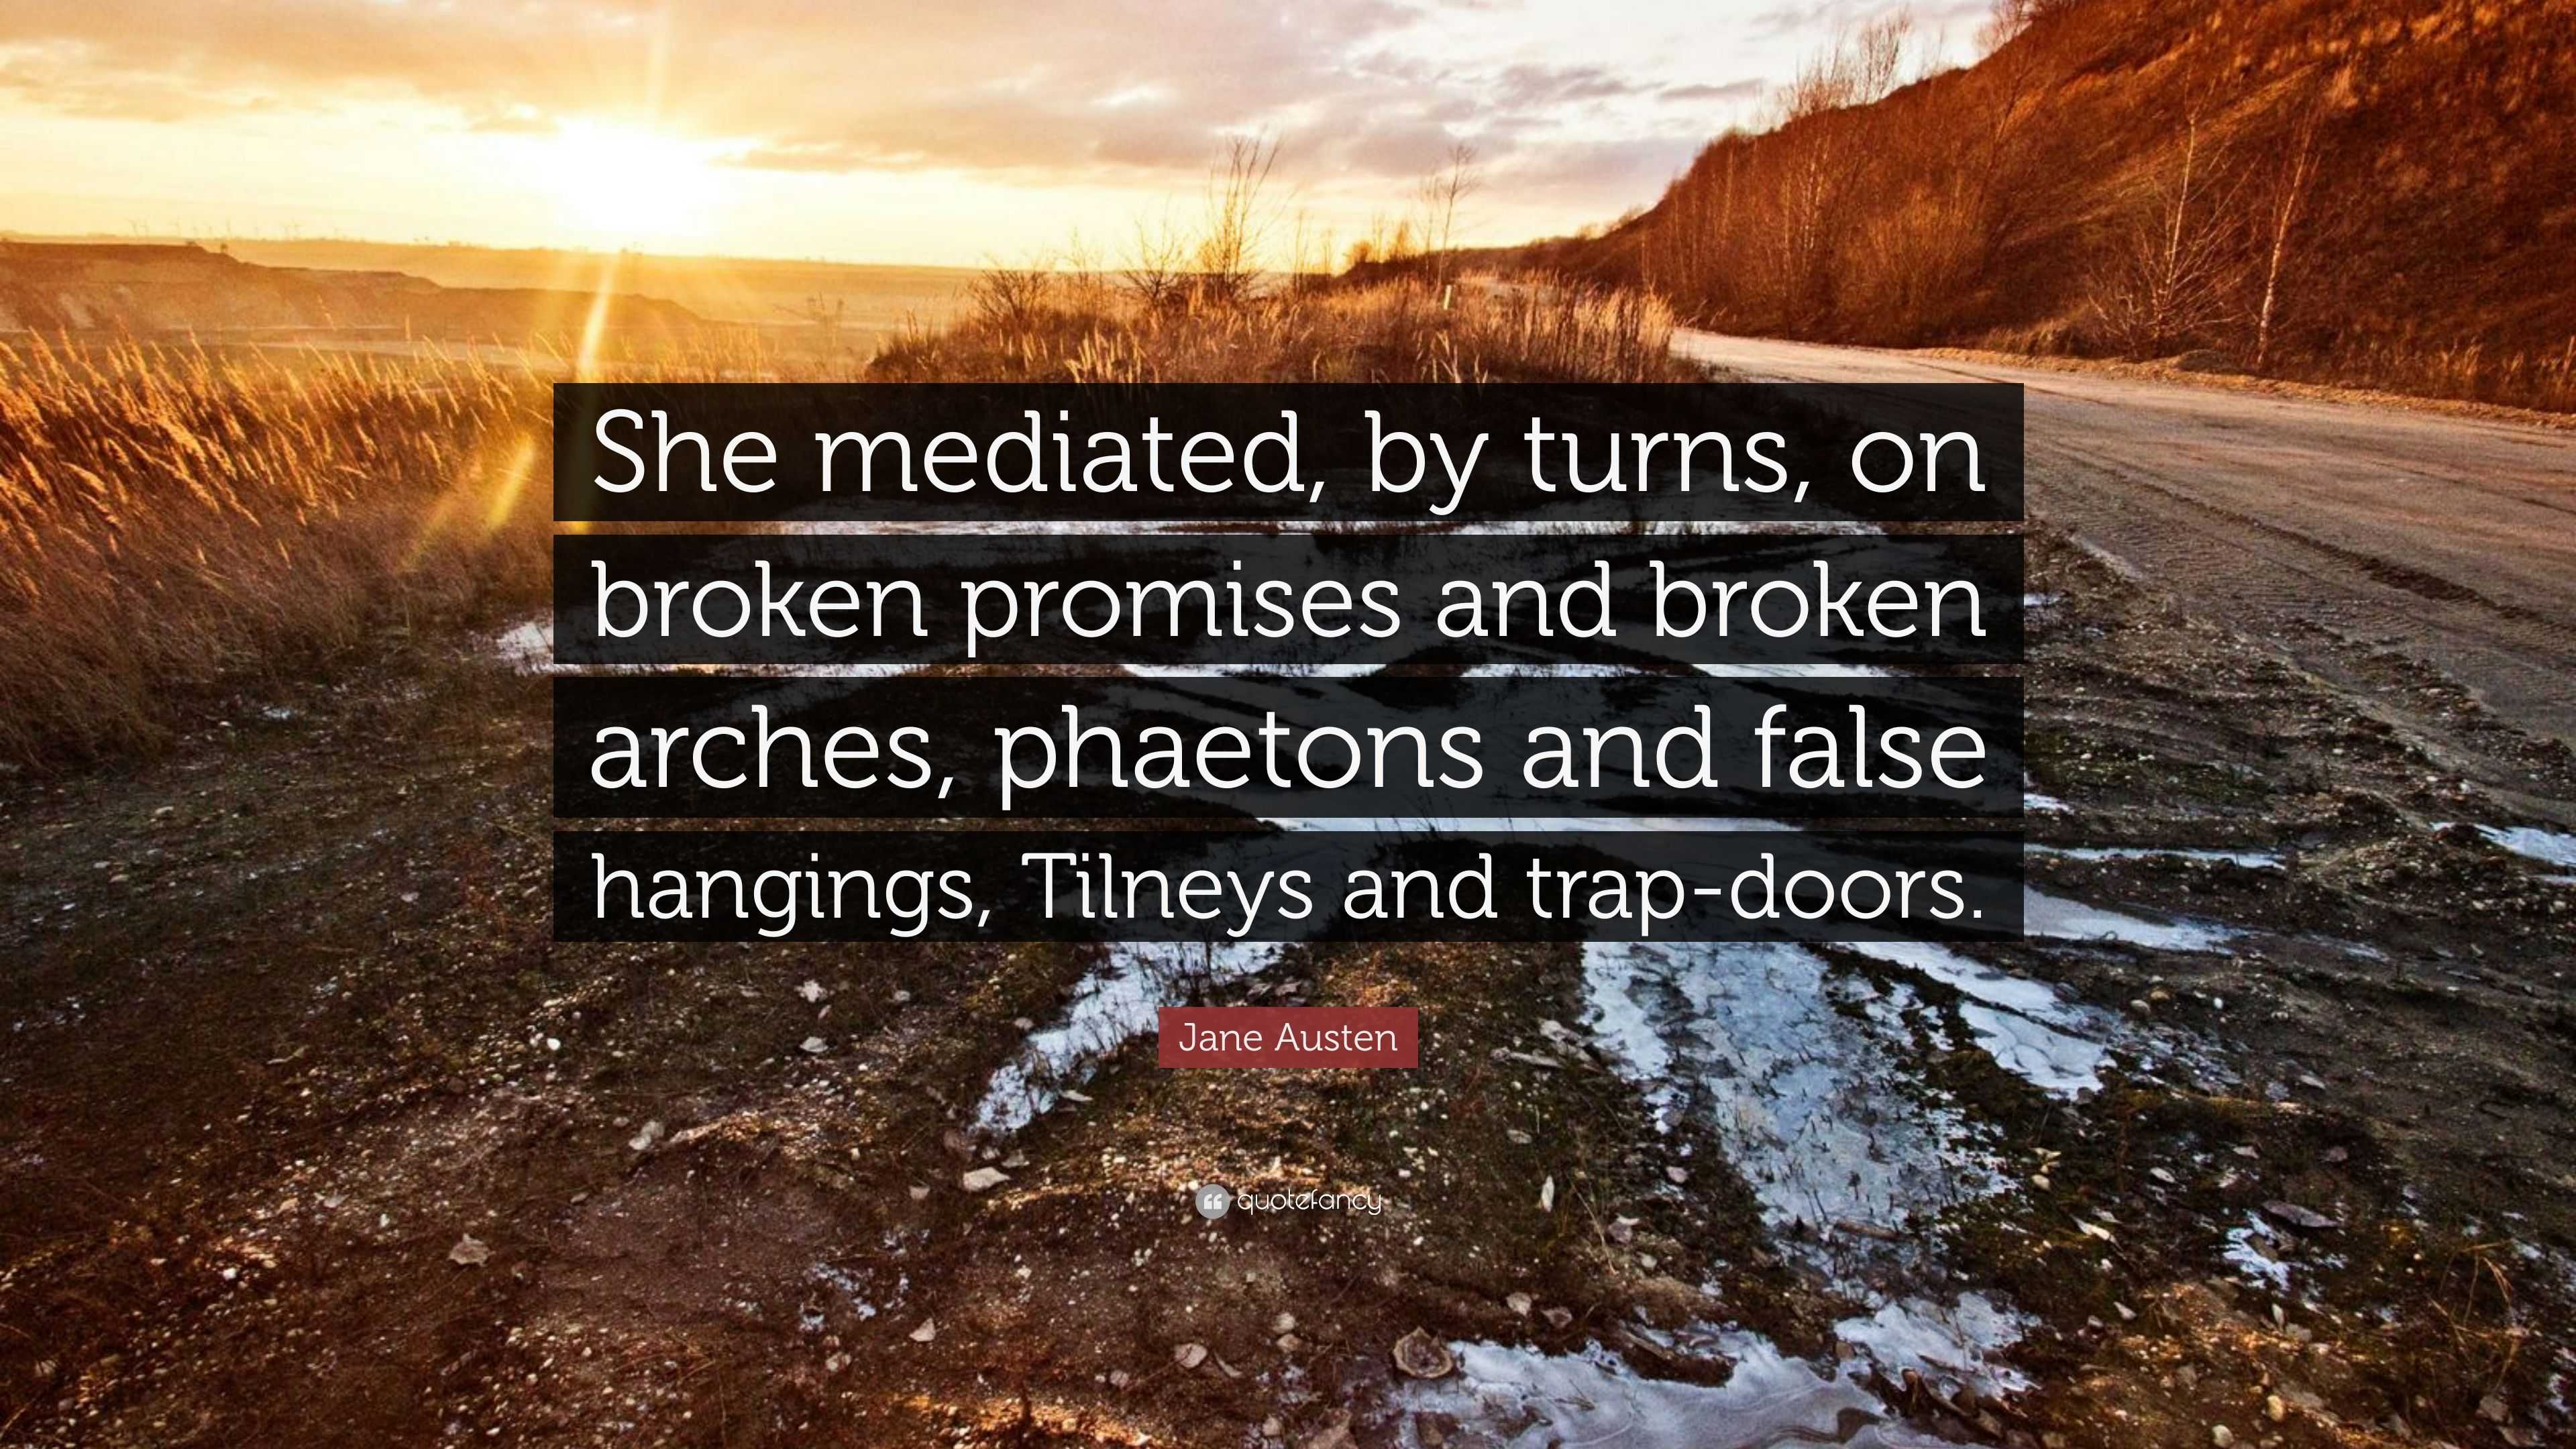 Jane Austen Quote “She mediated by turns on broken promises and broken